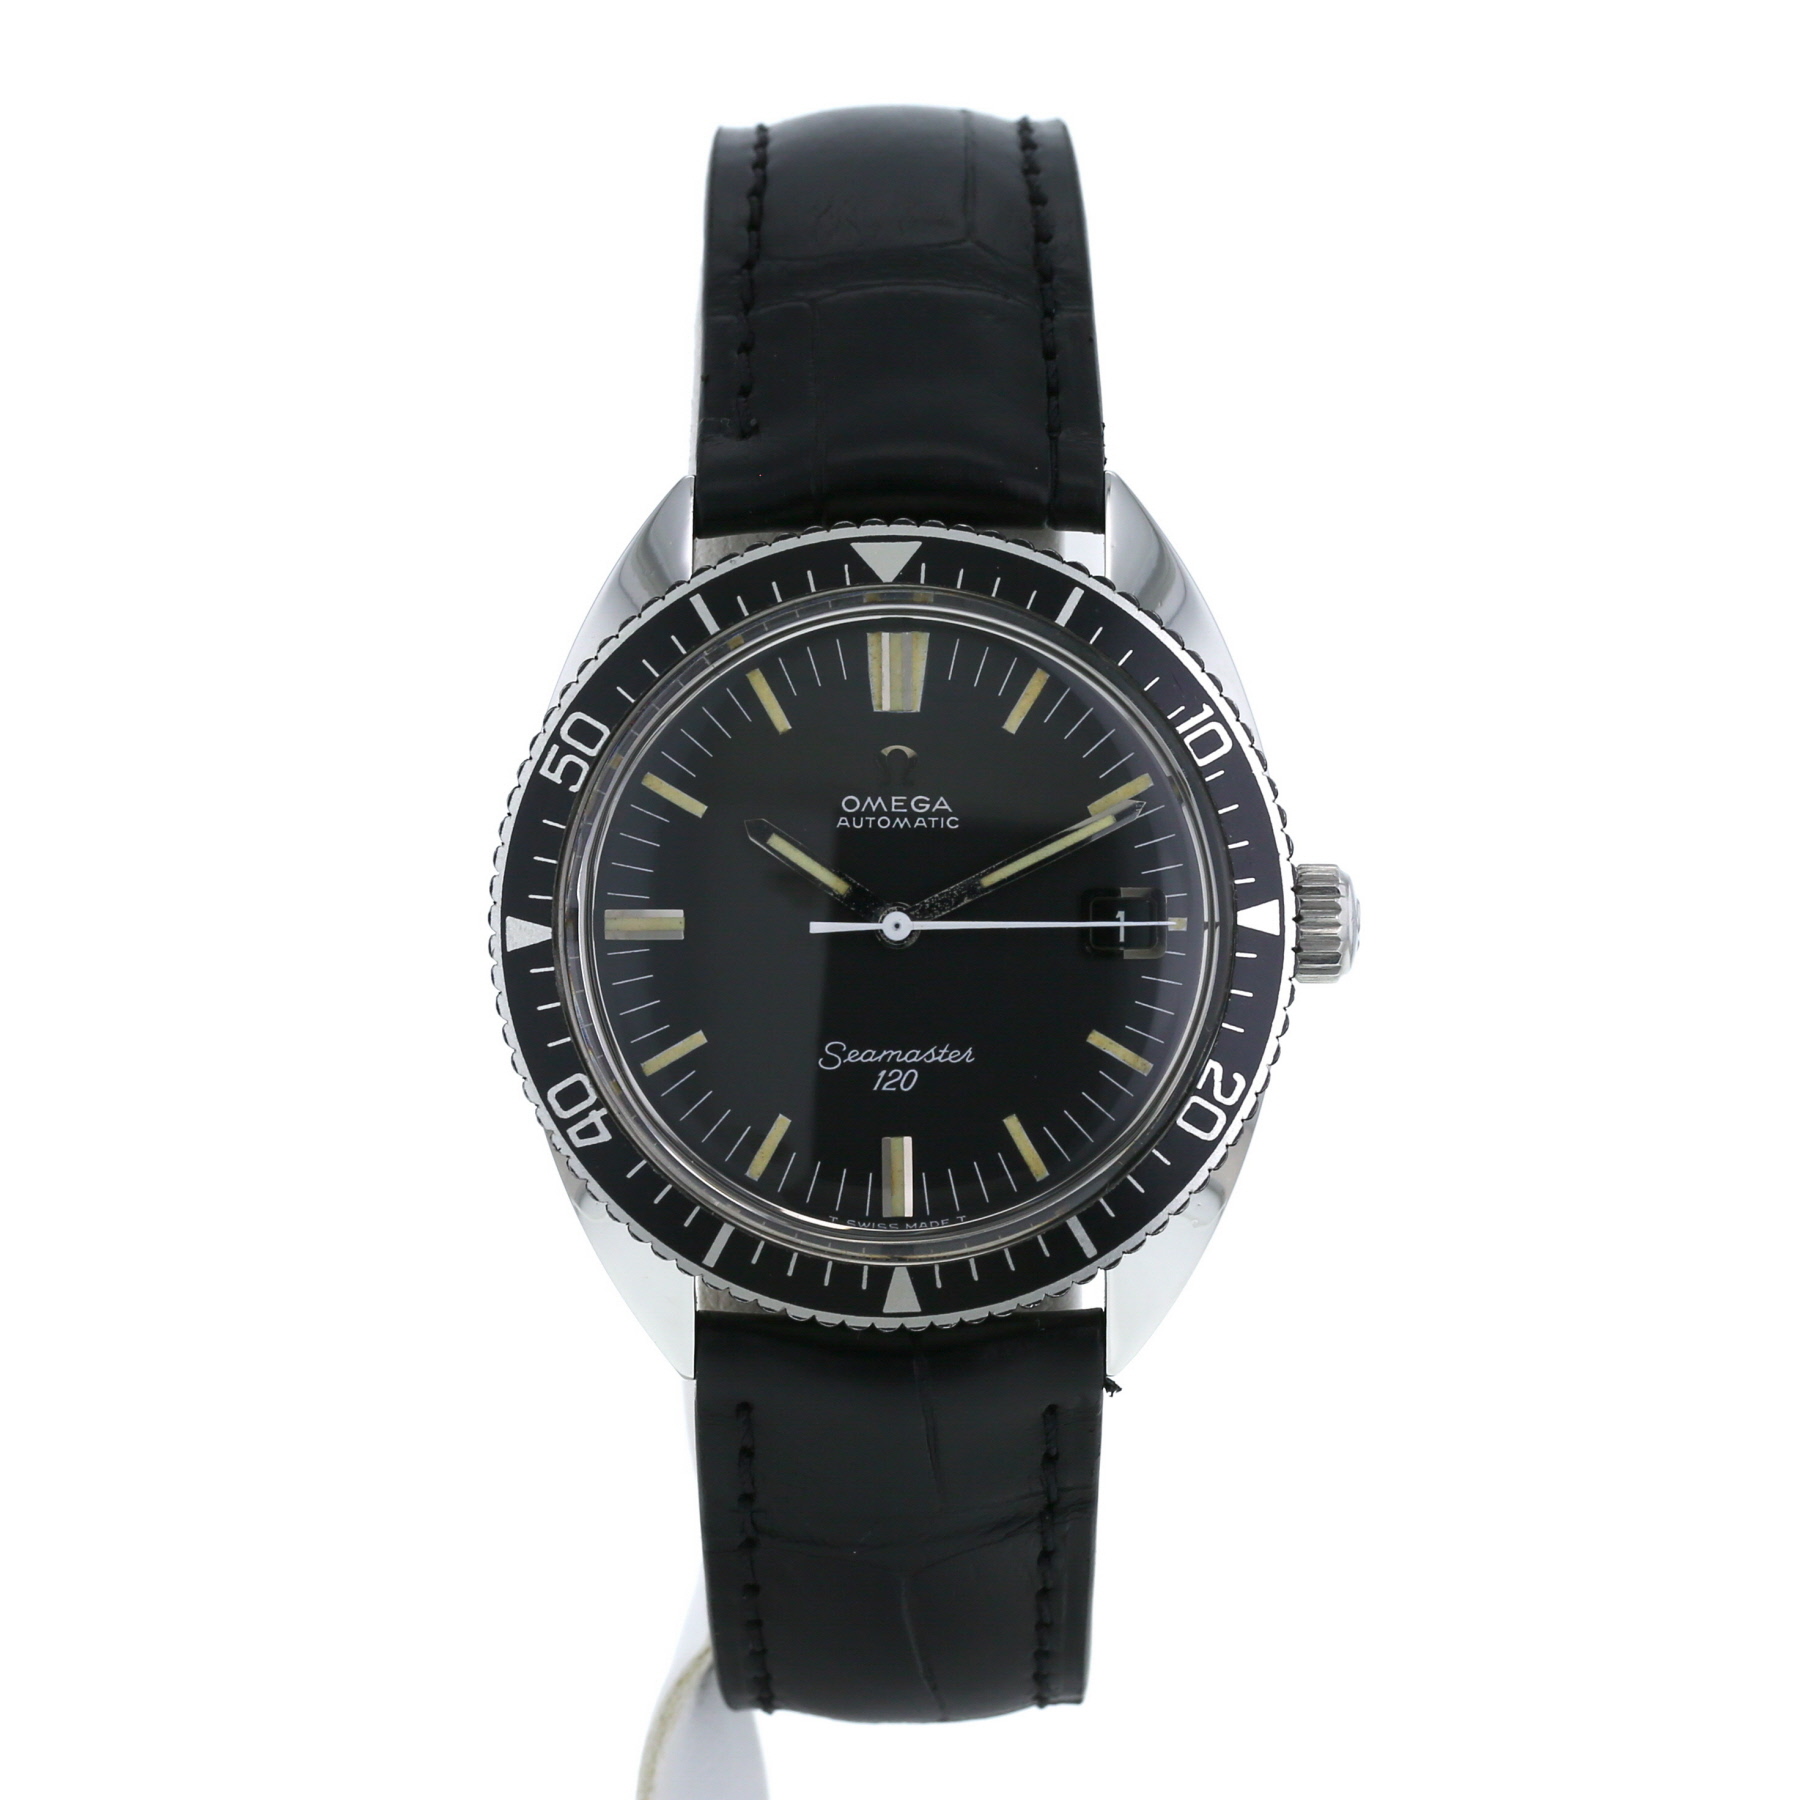 Seamaster 120 In Stainless Steel Ref: 166.027 Circa